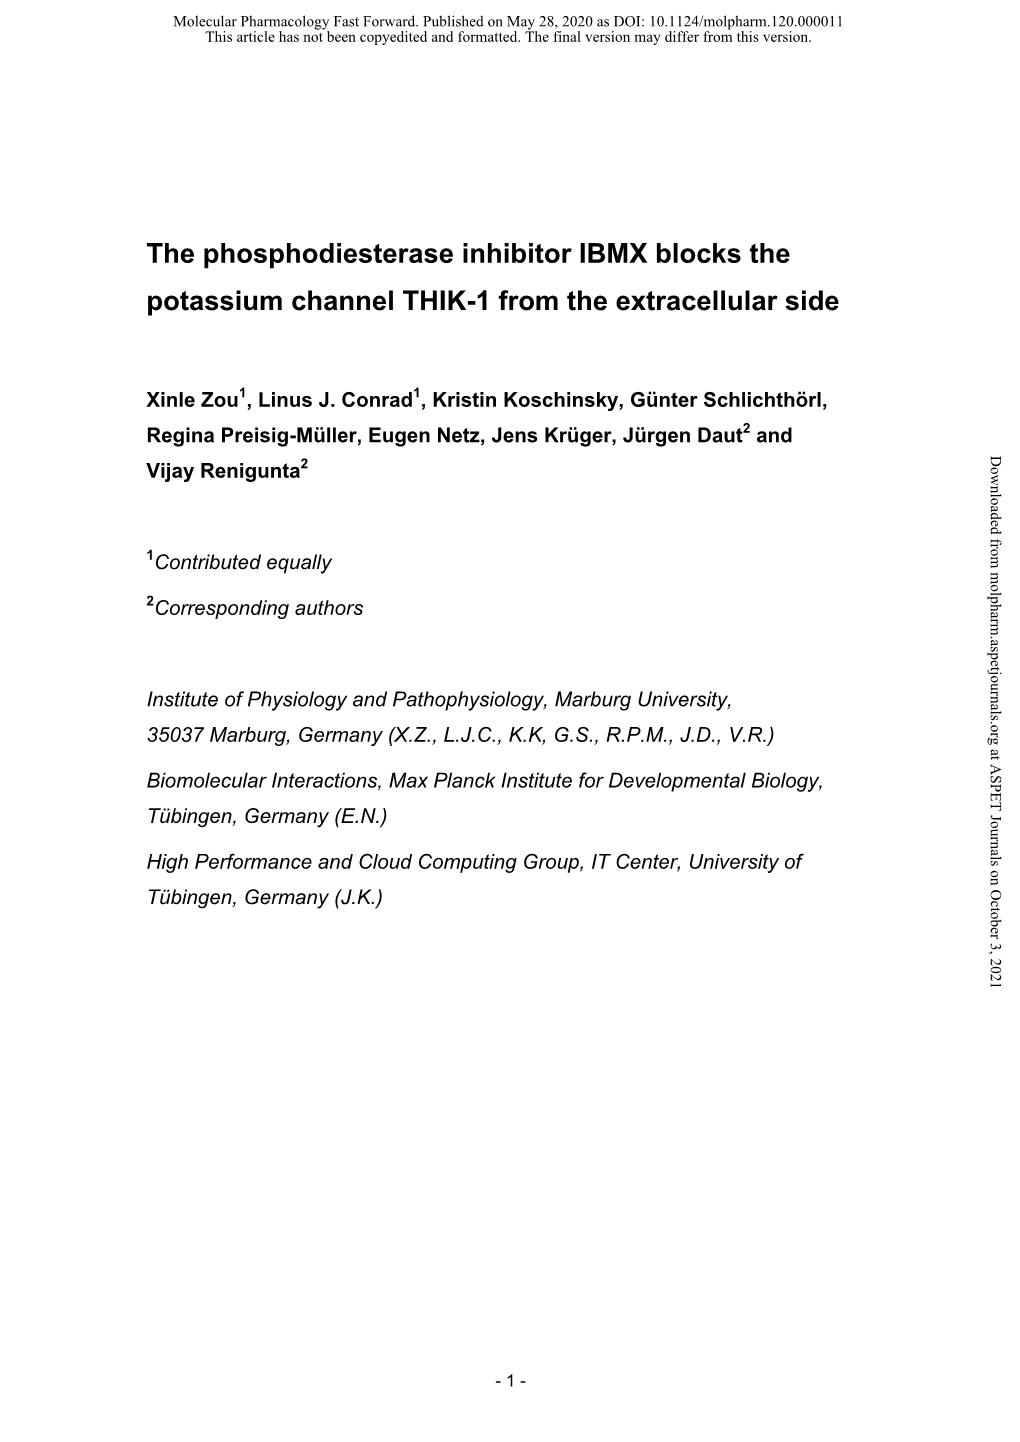 The Phosphodiesterase Inhibitor IBMX Blocks the Potassium Channel THIK-1 from the Extracellular Side